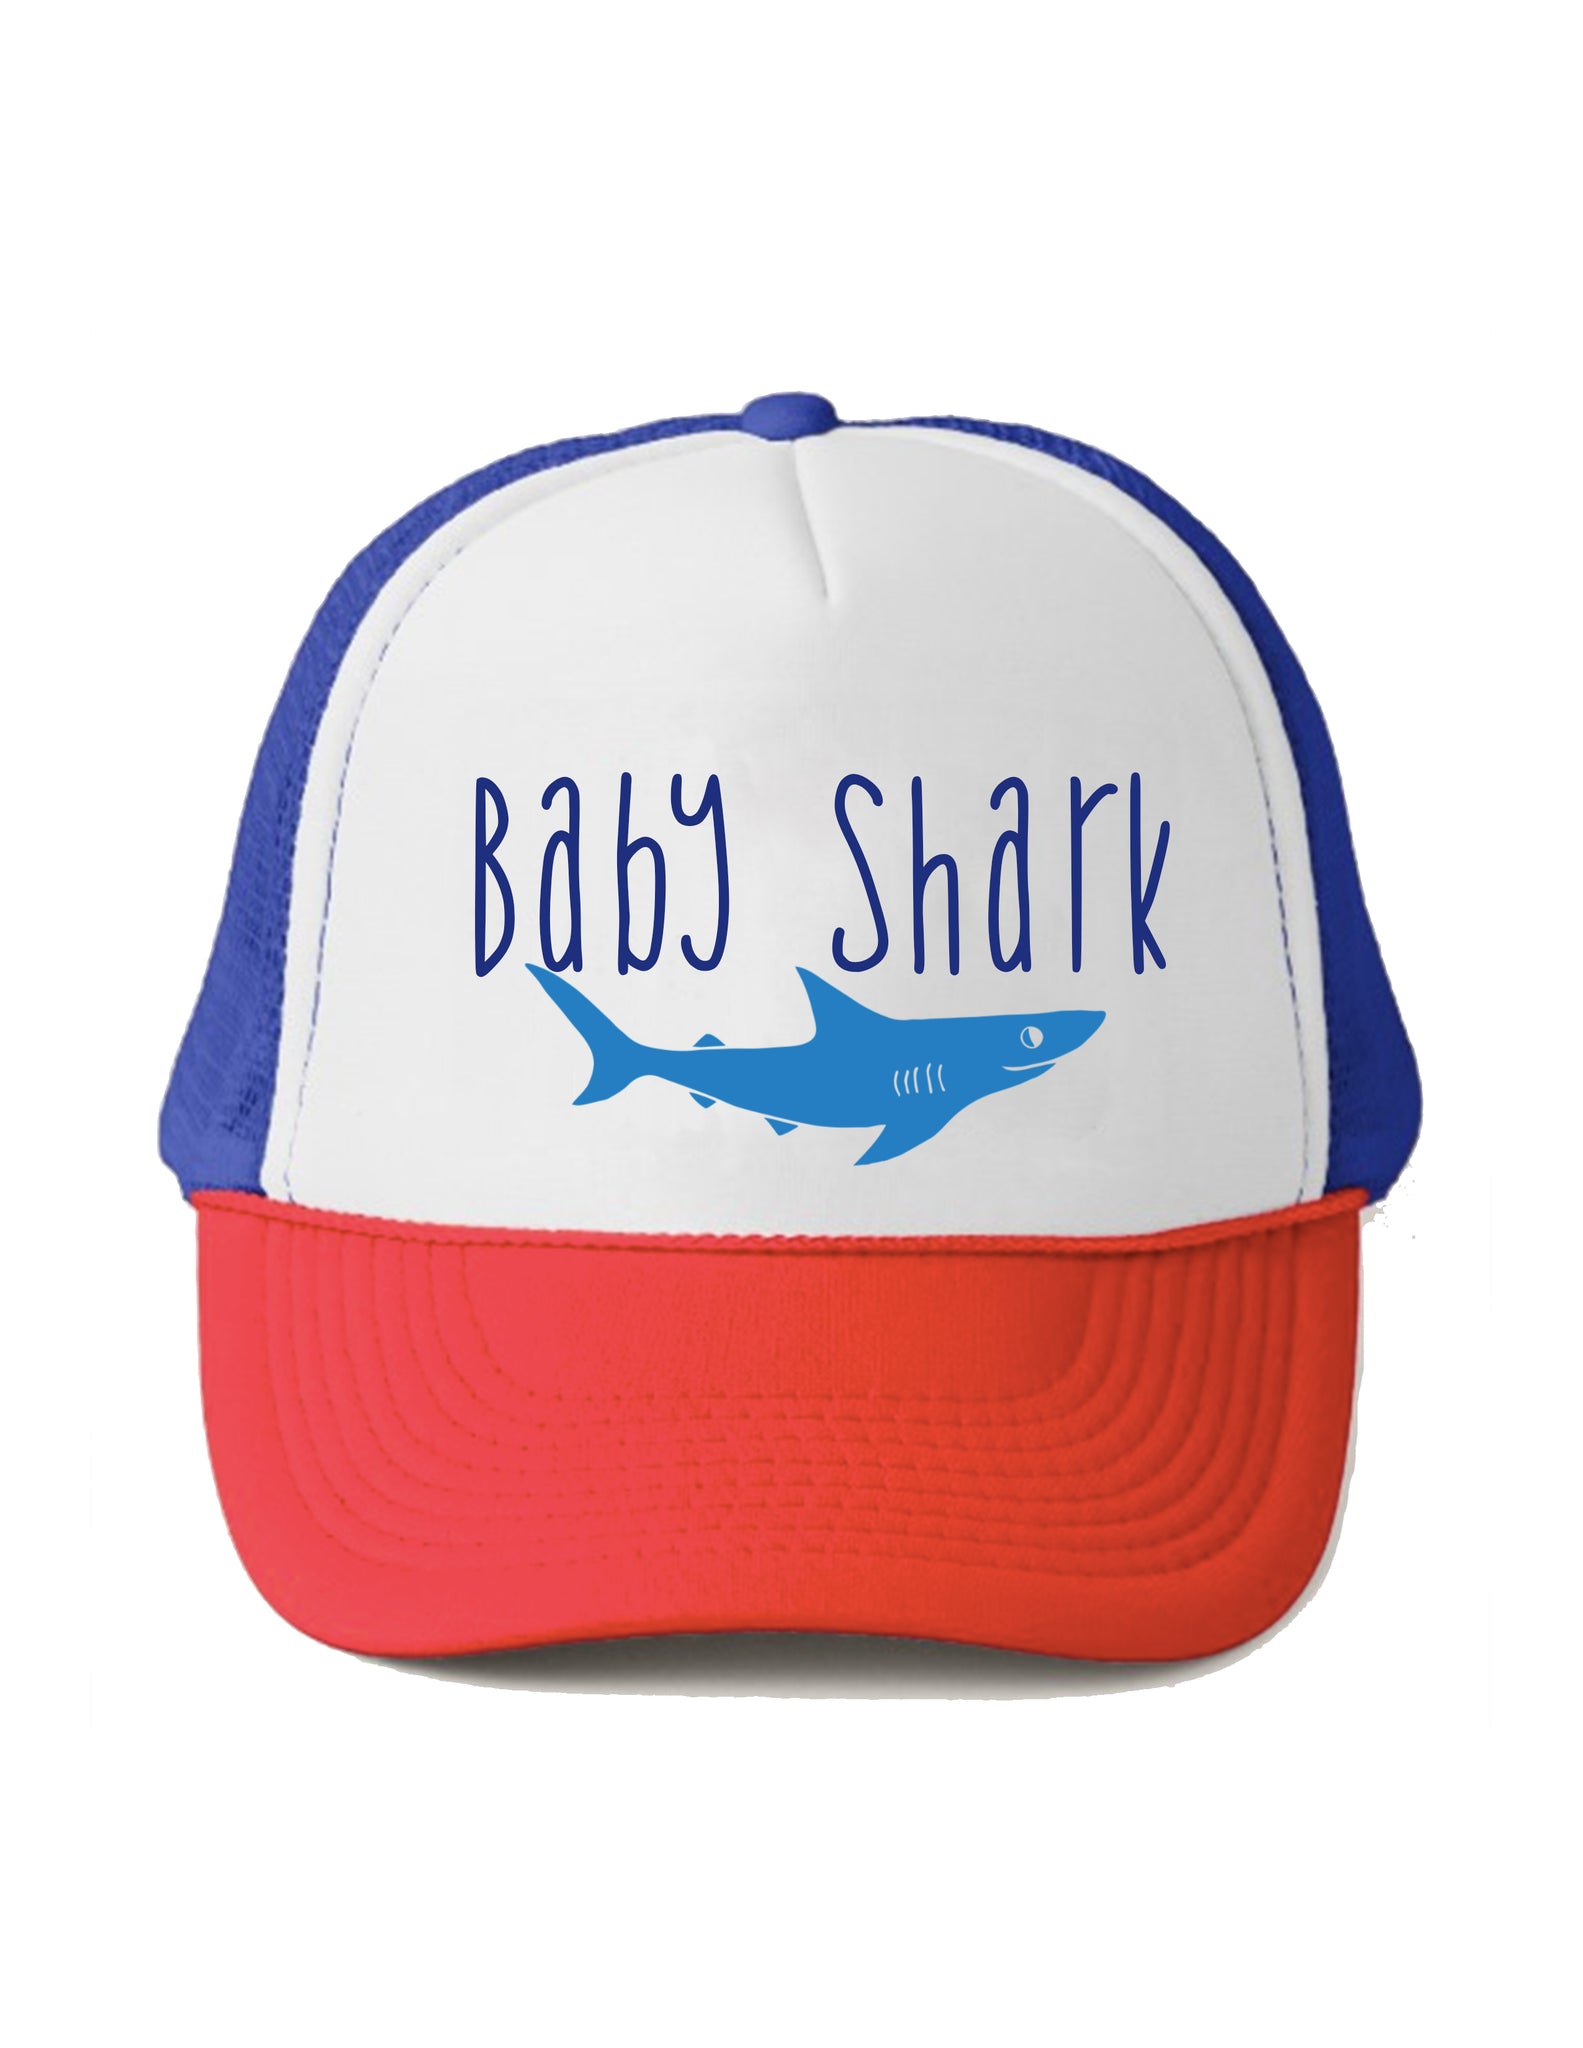 Baby Shark Trucker Hat By Beau and Belle Littles Red White and Blue baby size, youth size